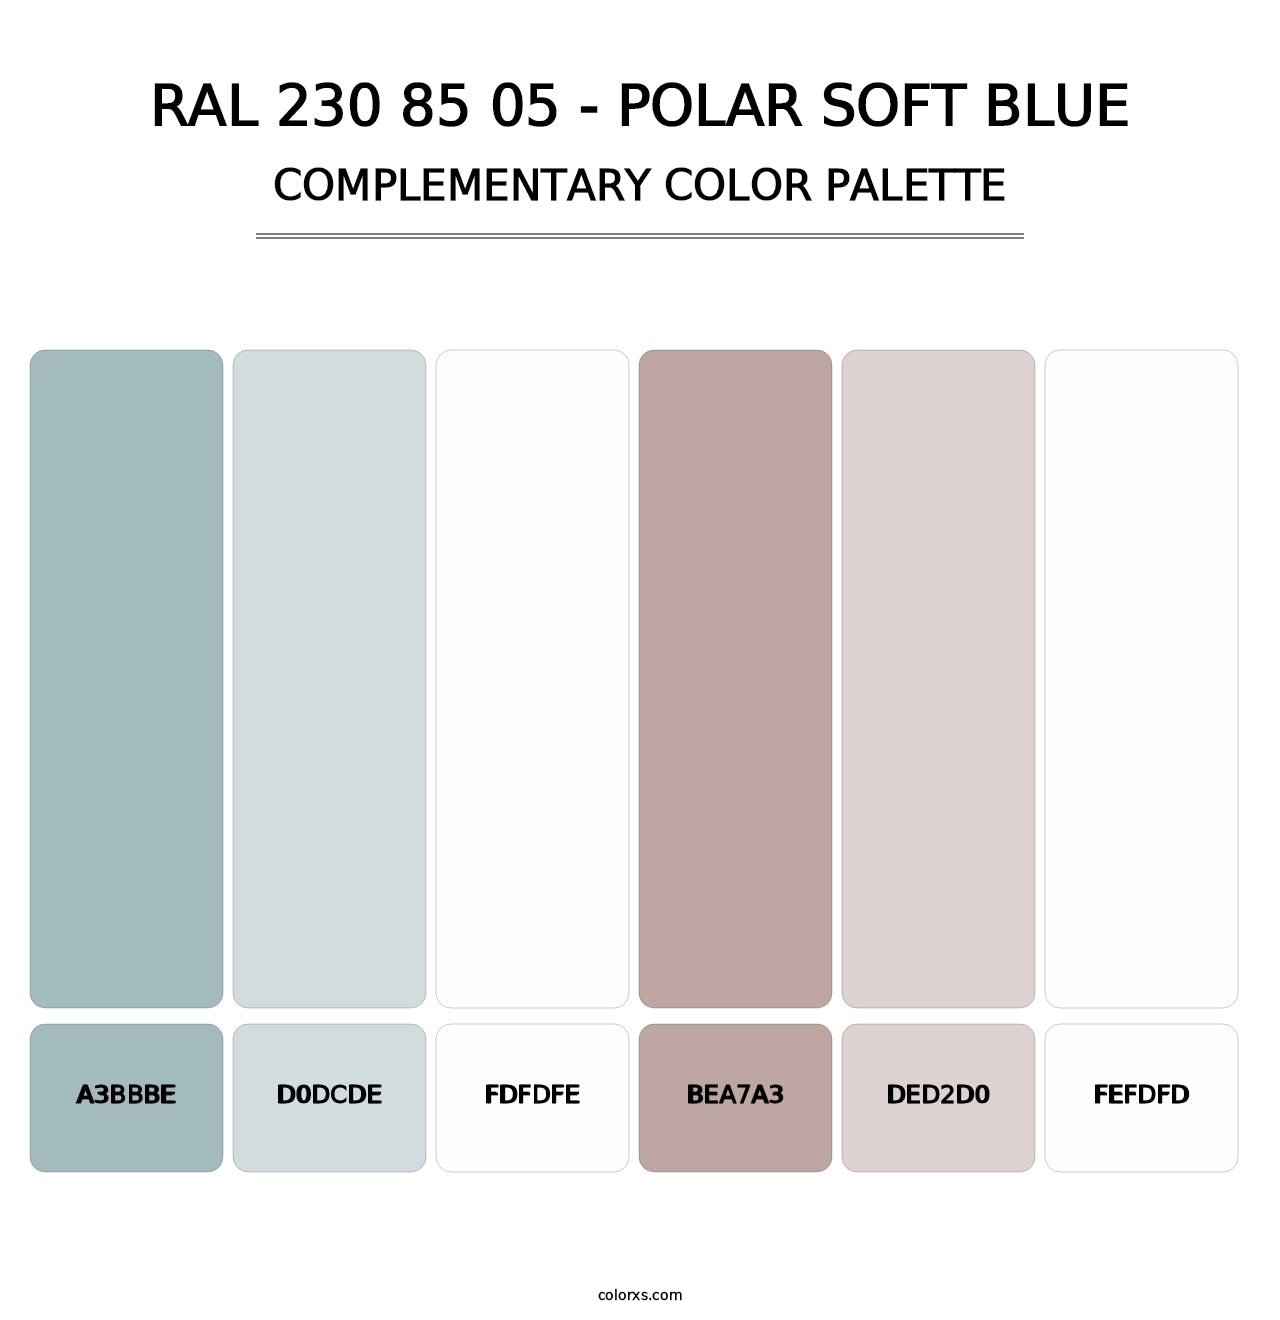 RAL 230 85 05 - Polar Soft Blue - Complementary Color Palette